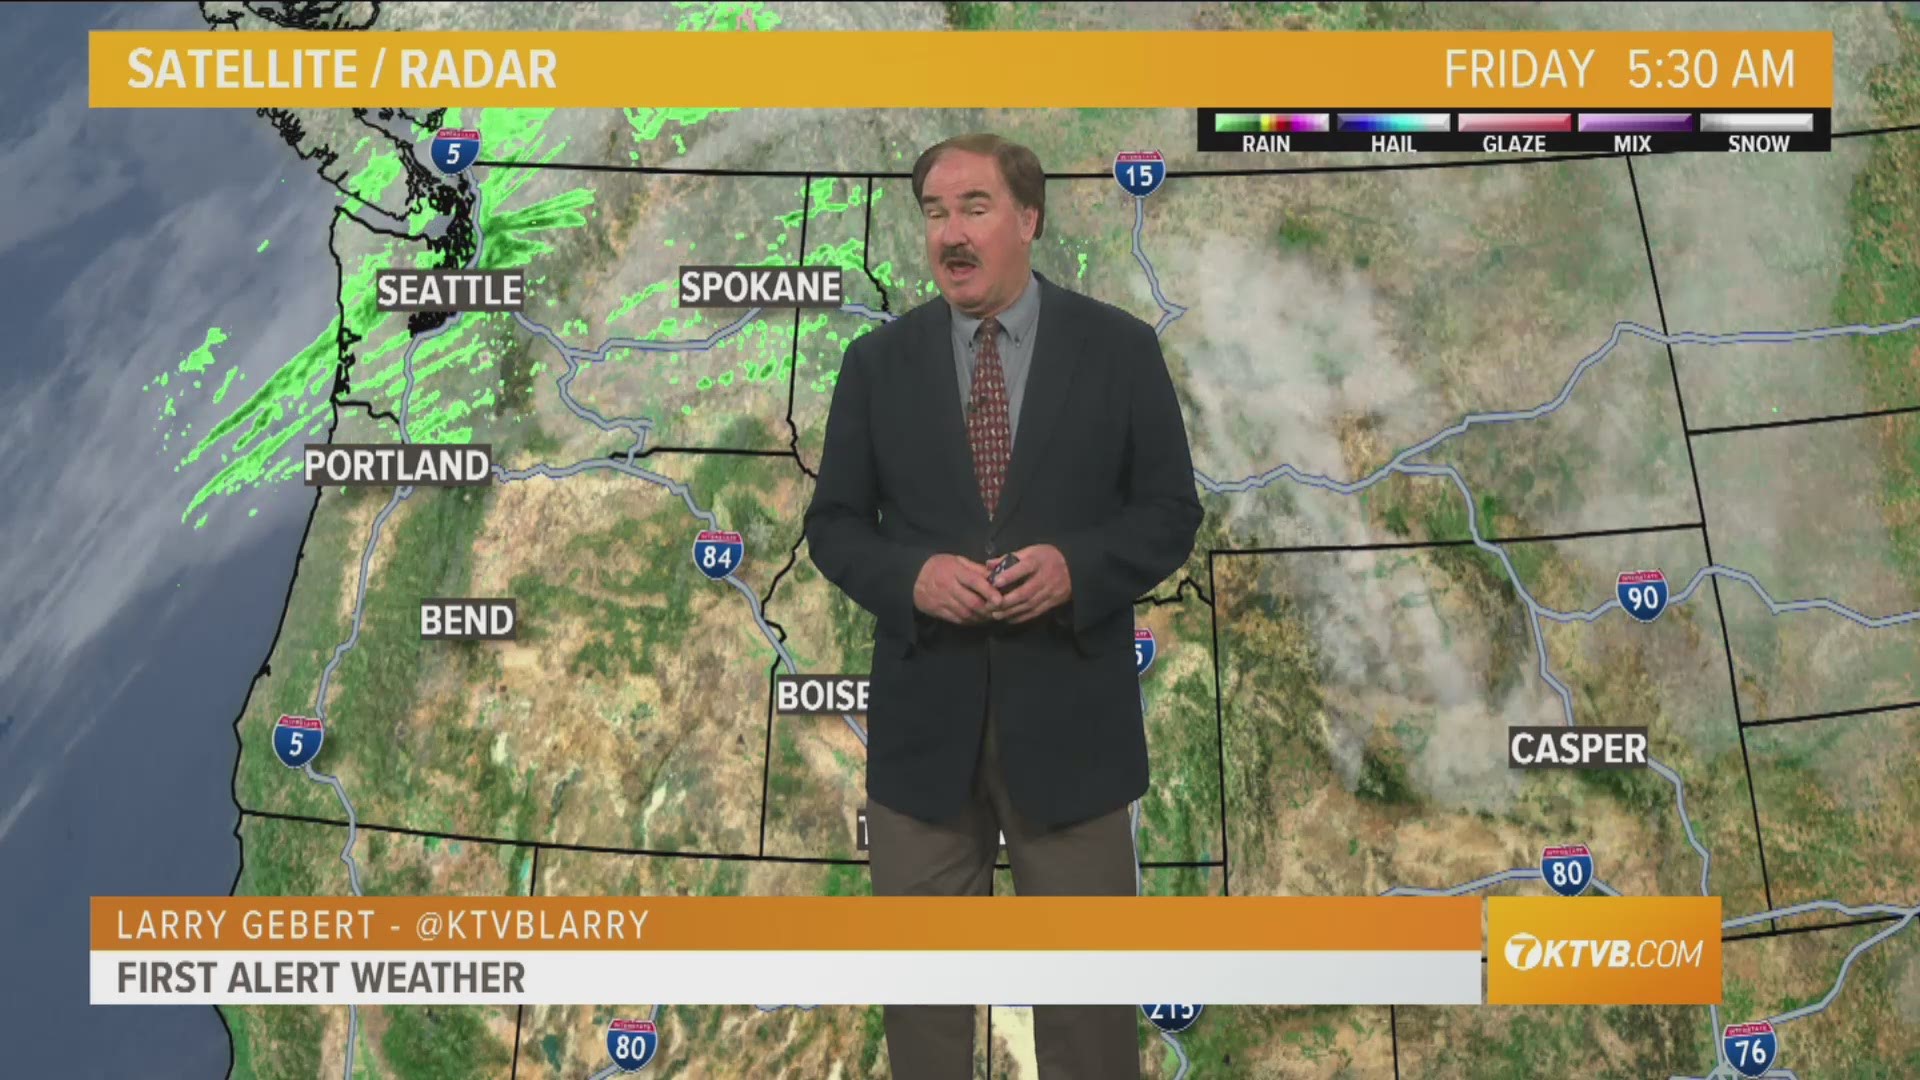 Larry Gebert says hot today with rain moving in on the weekend.